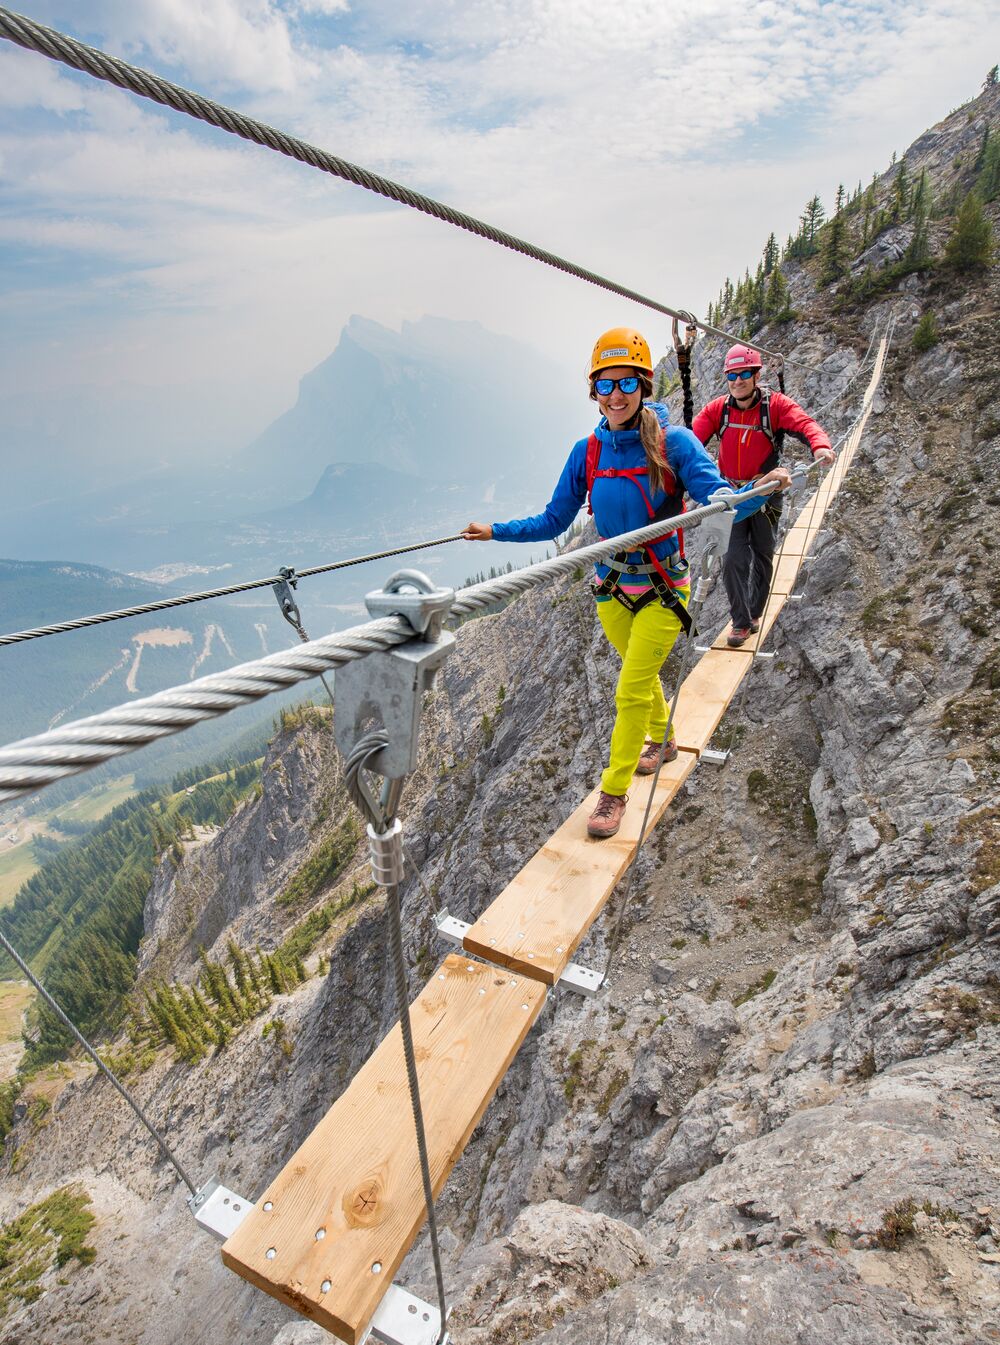 Two people on a small bridge suspended on the Mt. Norquay via feratta in Banff National Park..